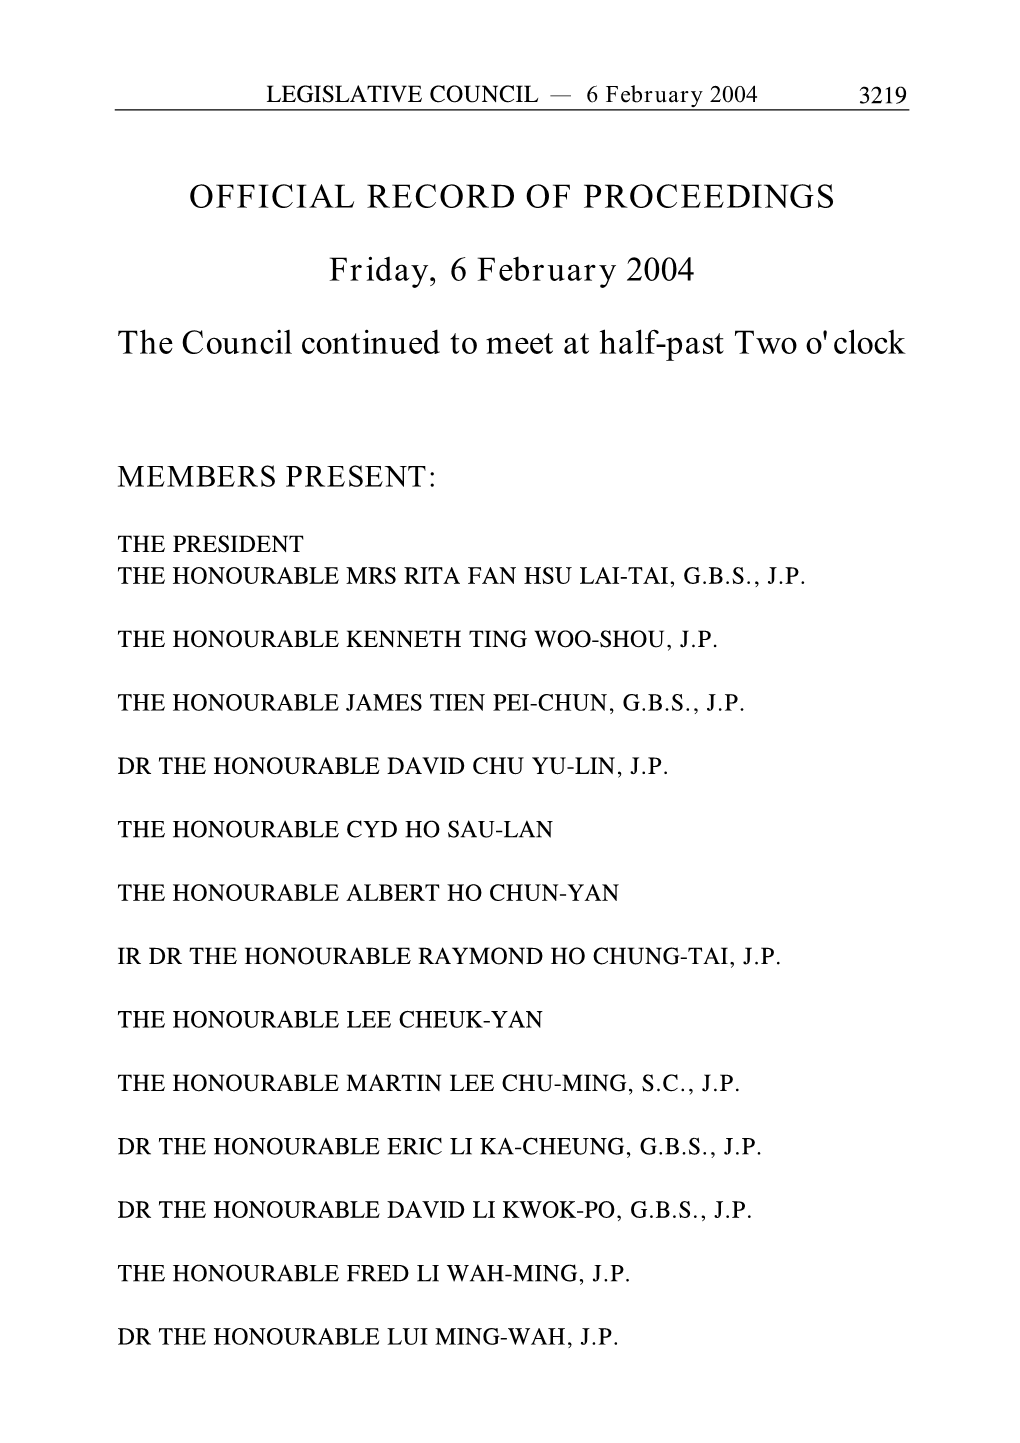 OFFICIAL RECORD of PROCEEDINGS Friday, 6 February